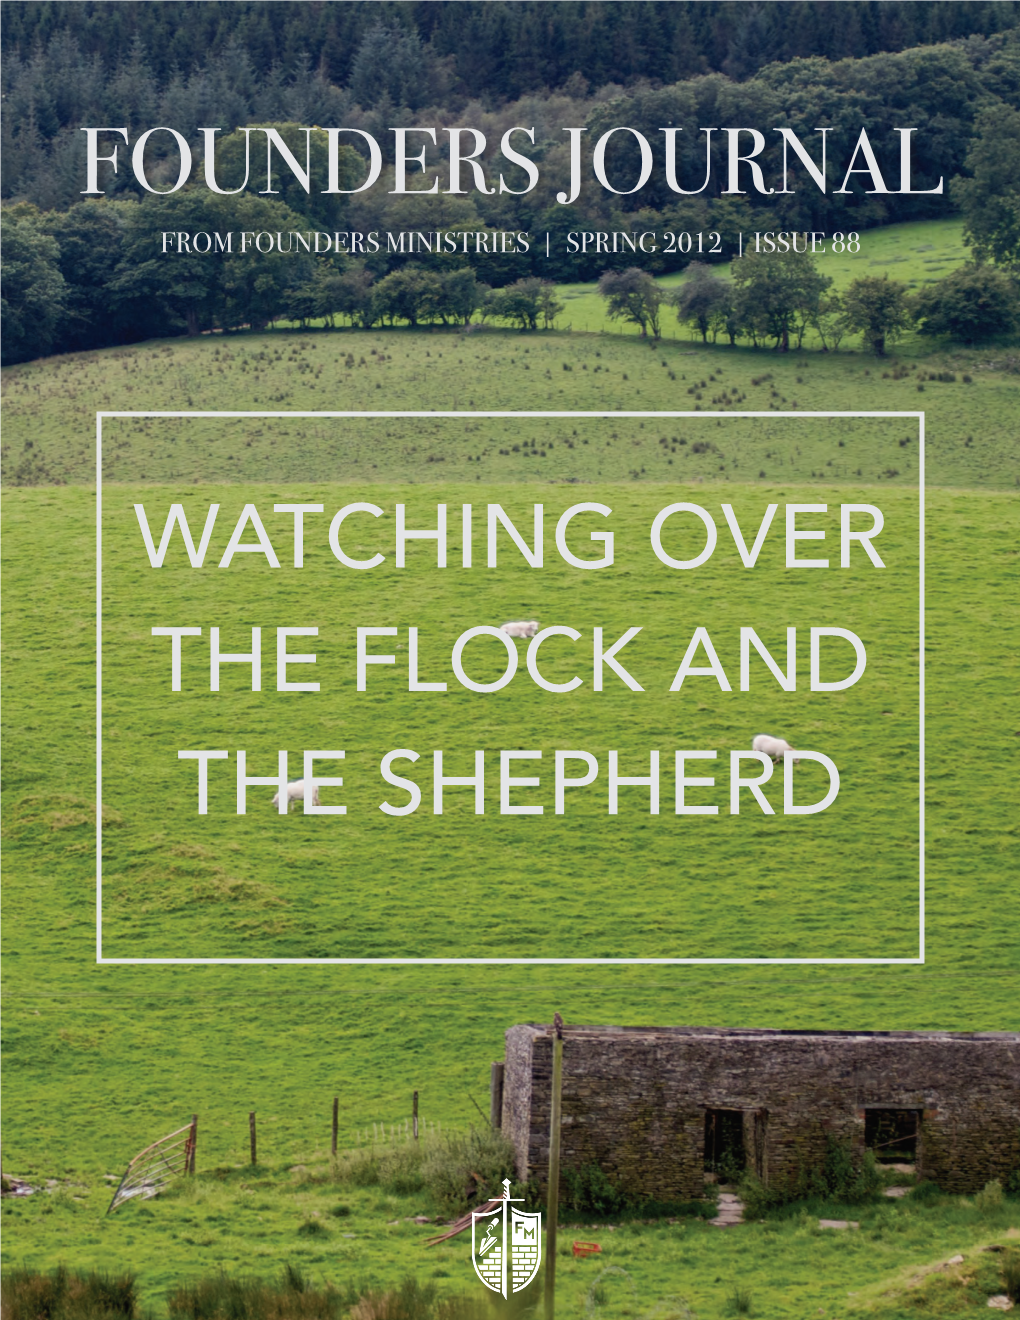 Founders Journal from Founders Ministries | Spring 2012 | Issue 88